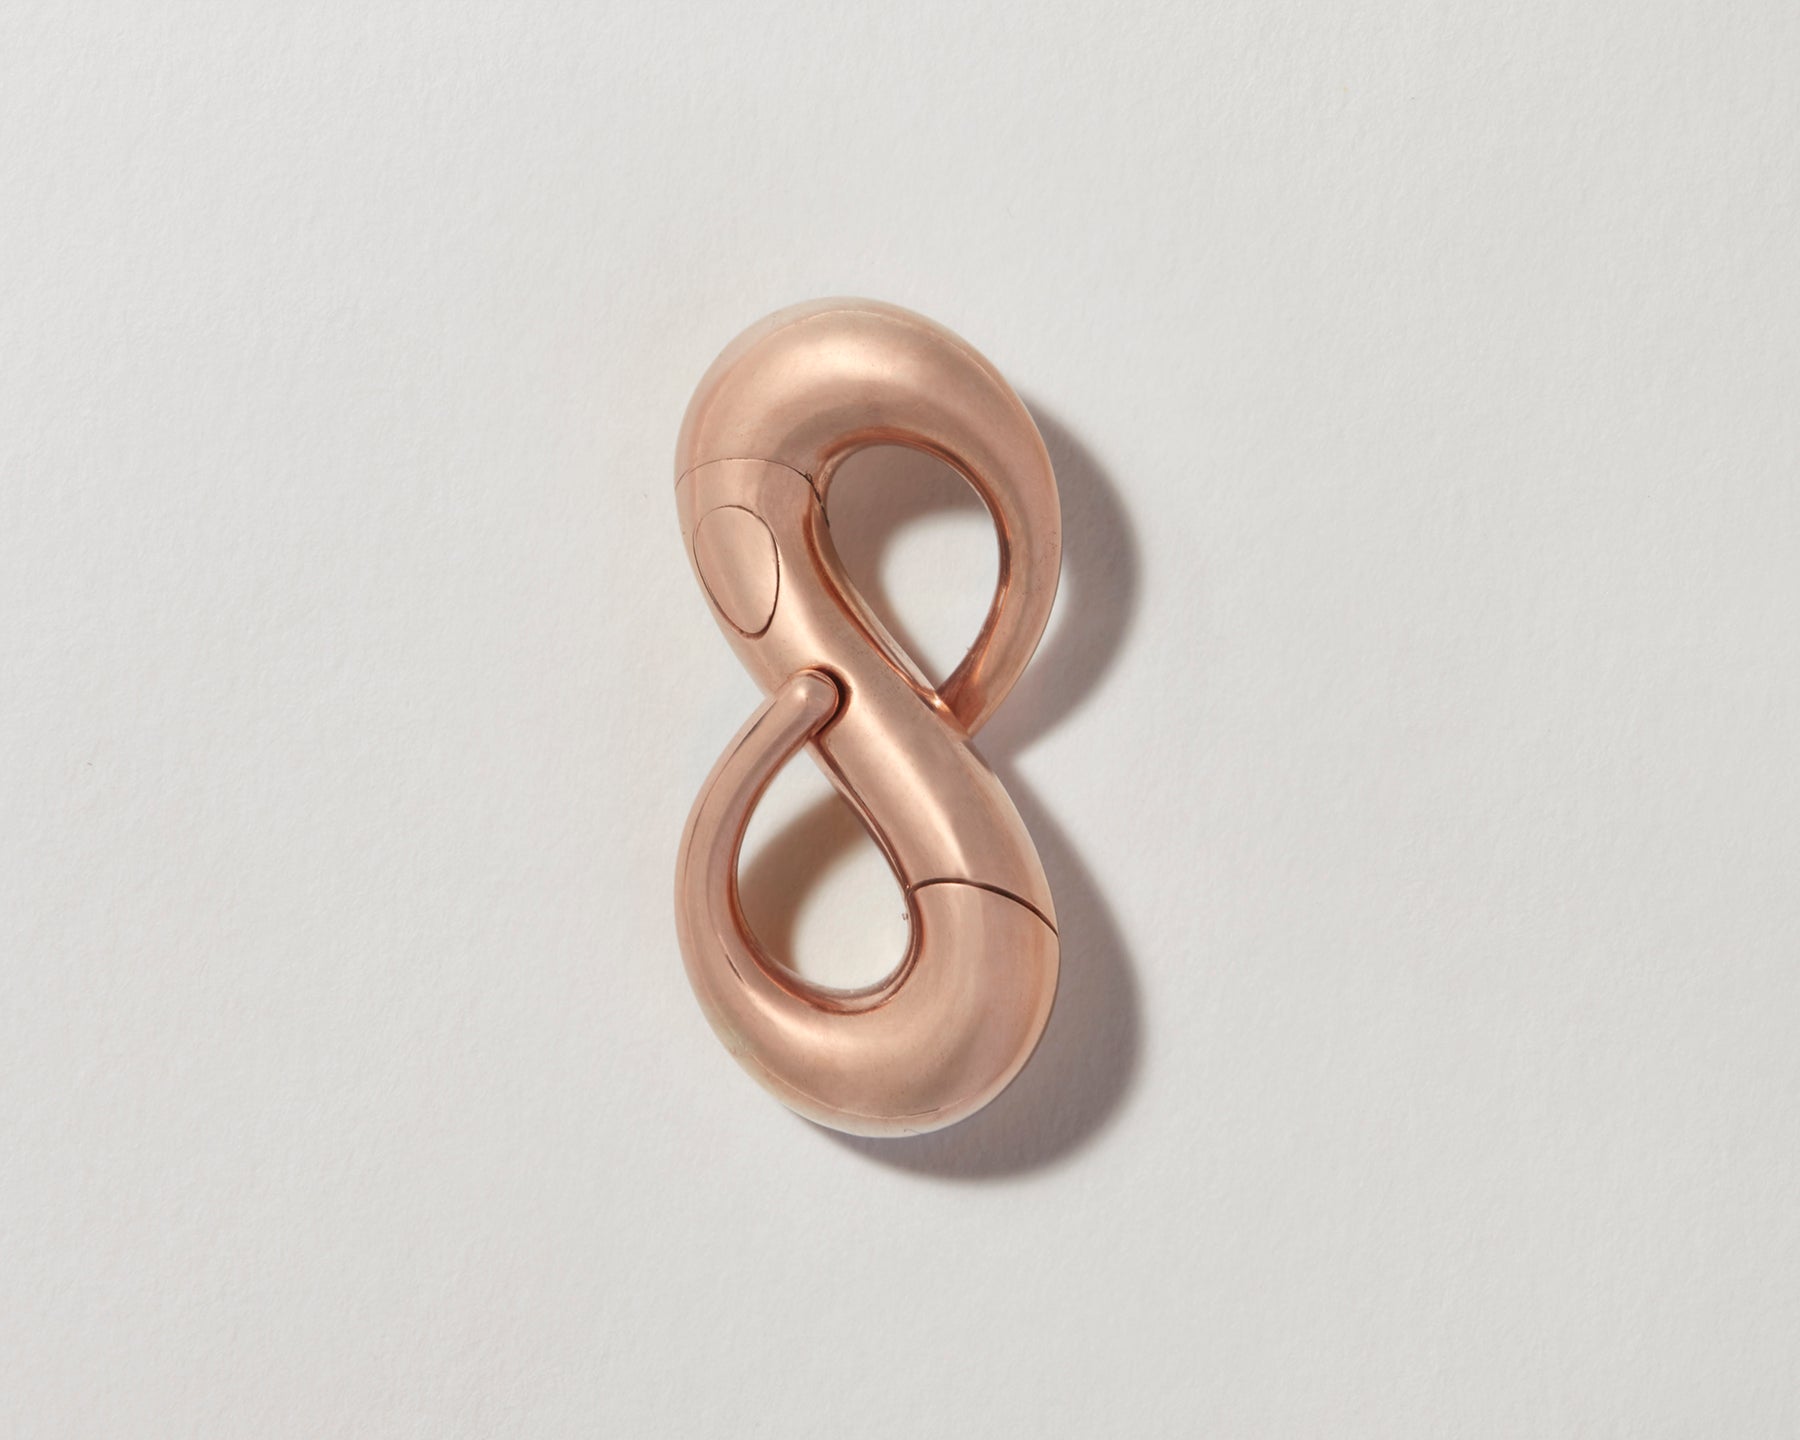 Rose gold infinity lock with clasp closed against gray backdrop